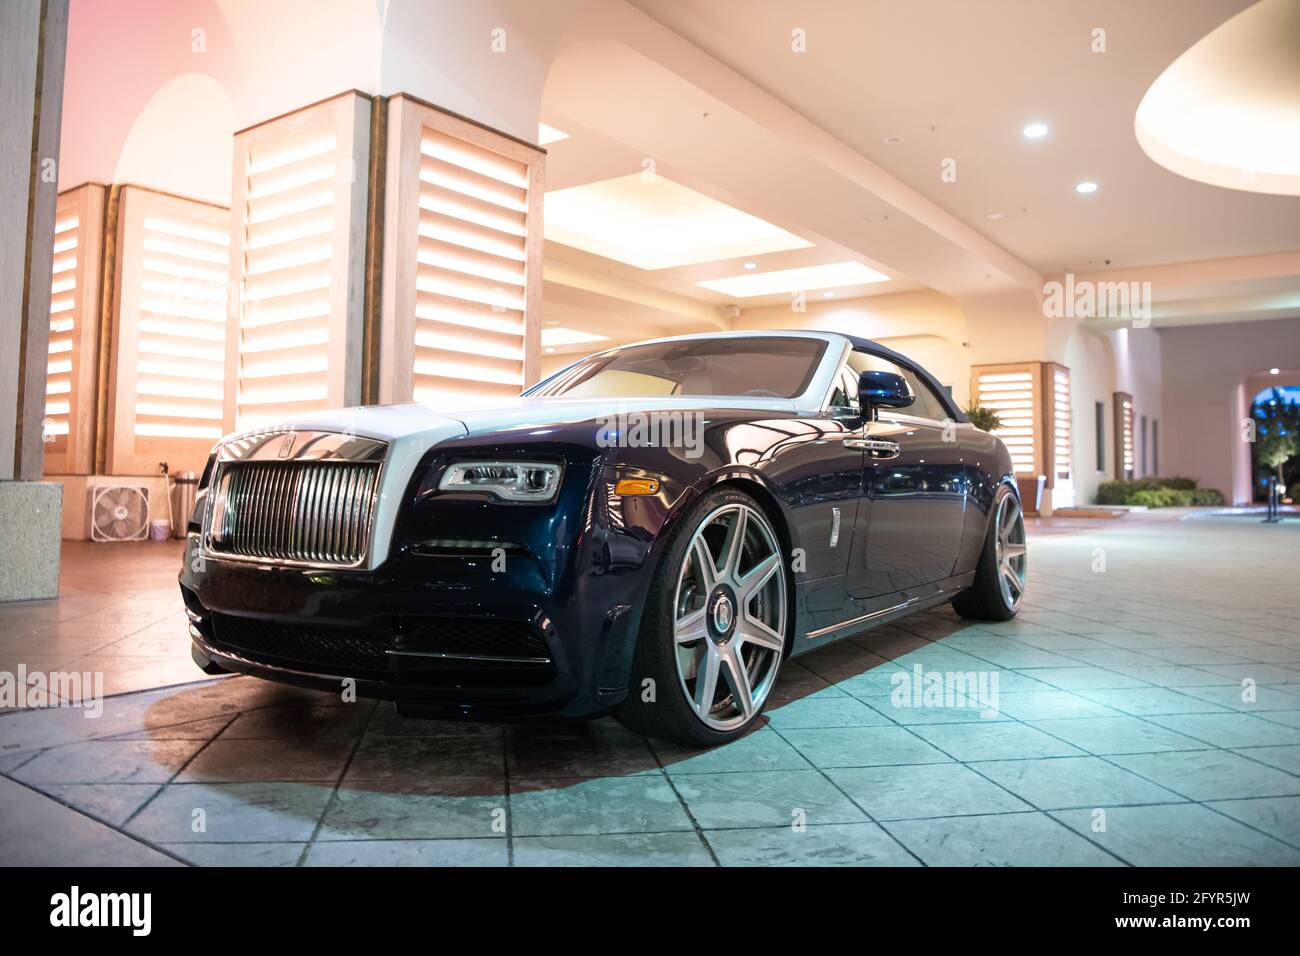 New  Used RollsRoyce Dawn for Sale Near Miami FL  Discover Cars for Sale